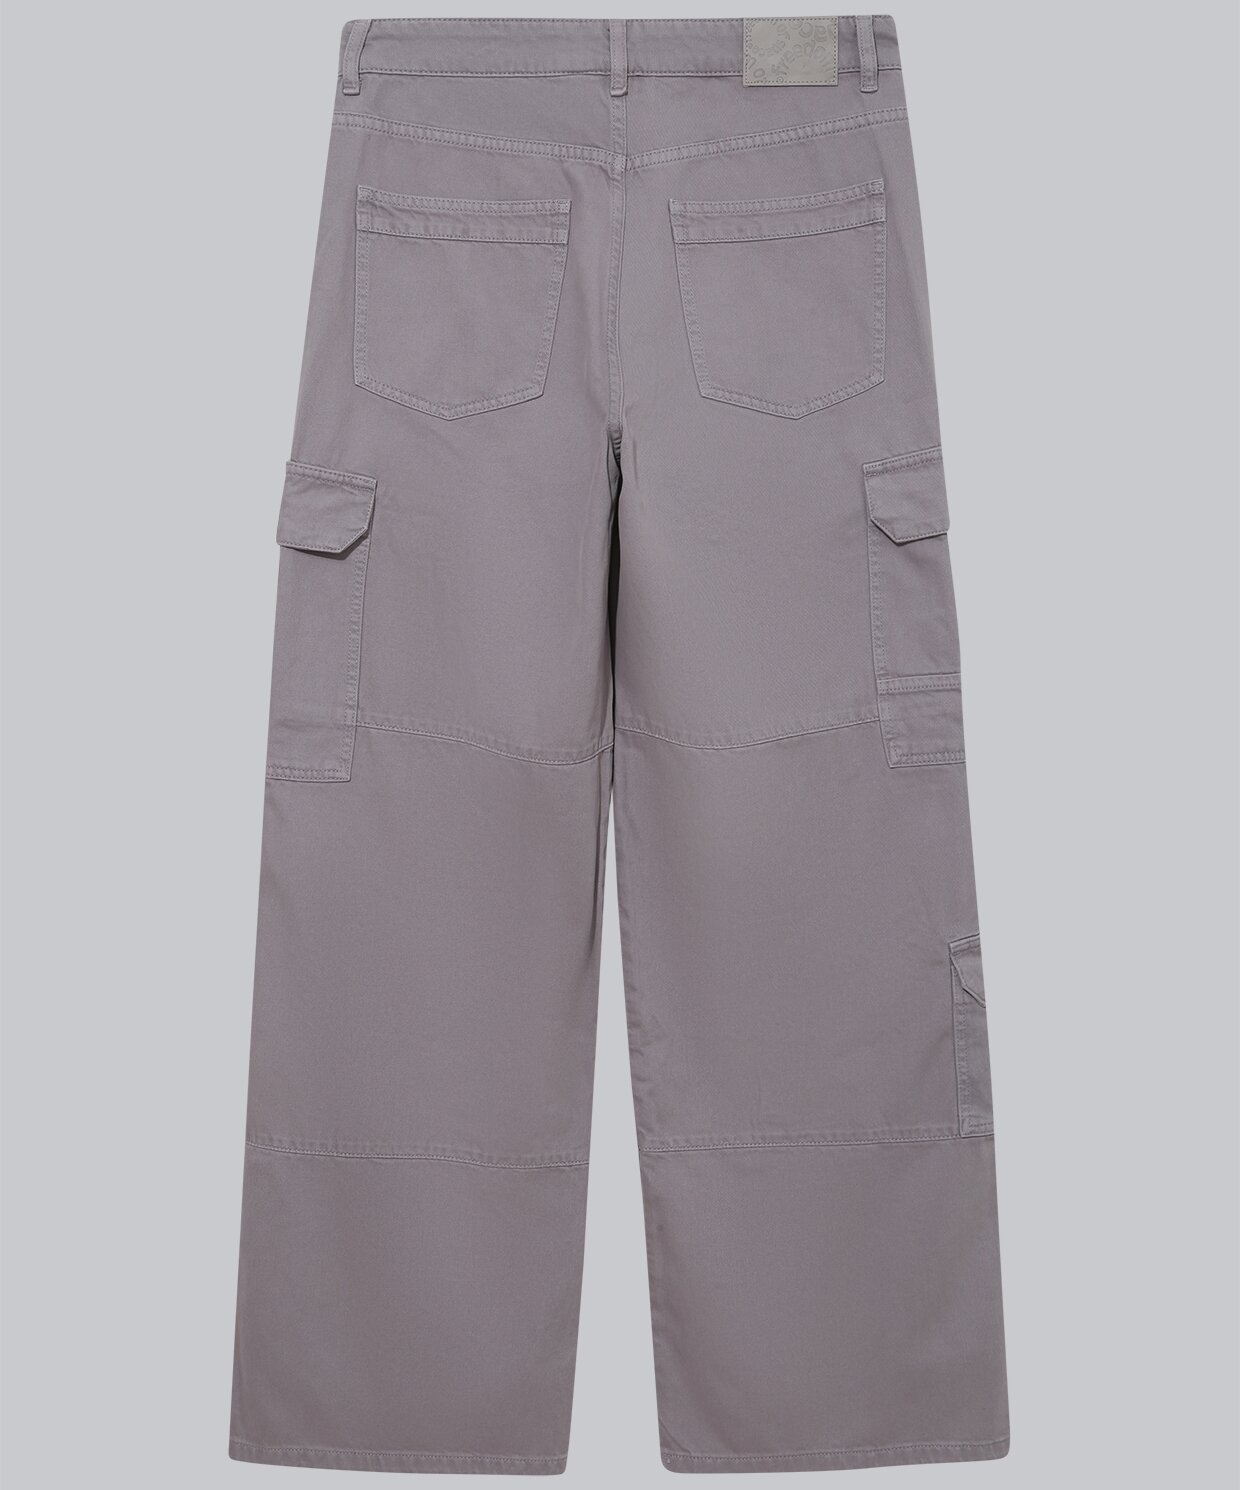 resm Freedom Of Space Grey Cargo Pants